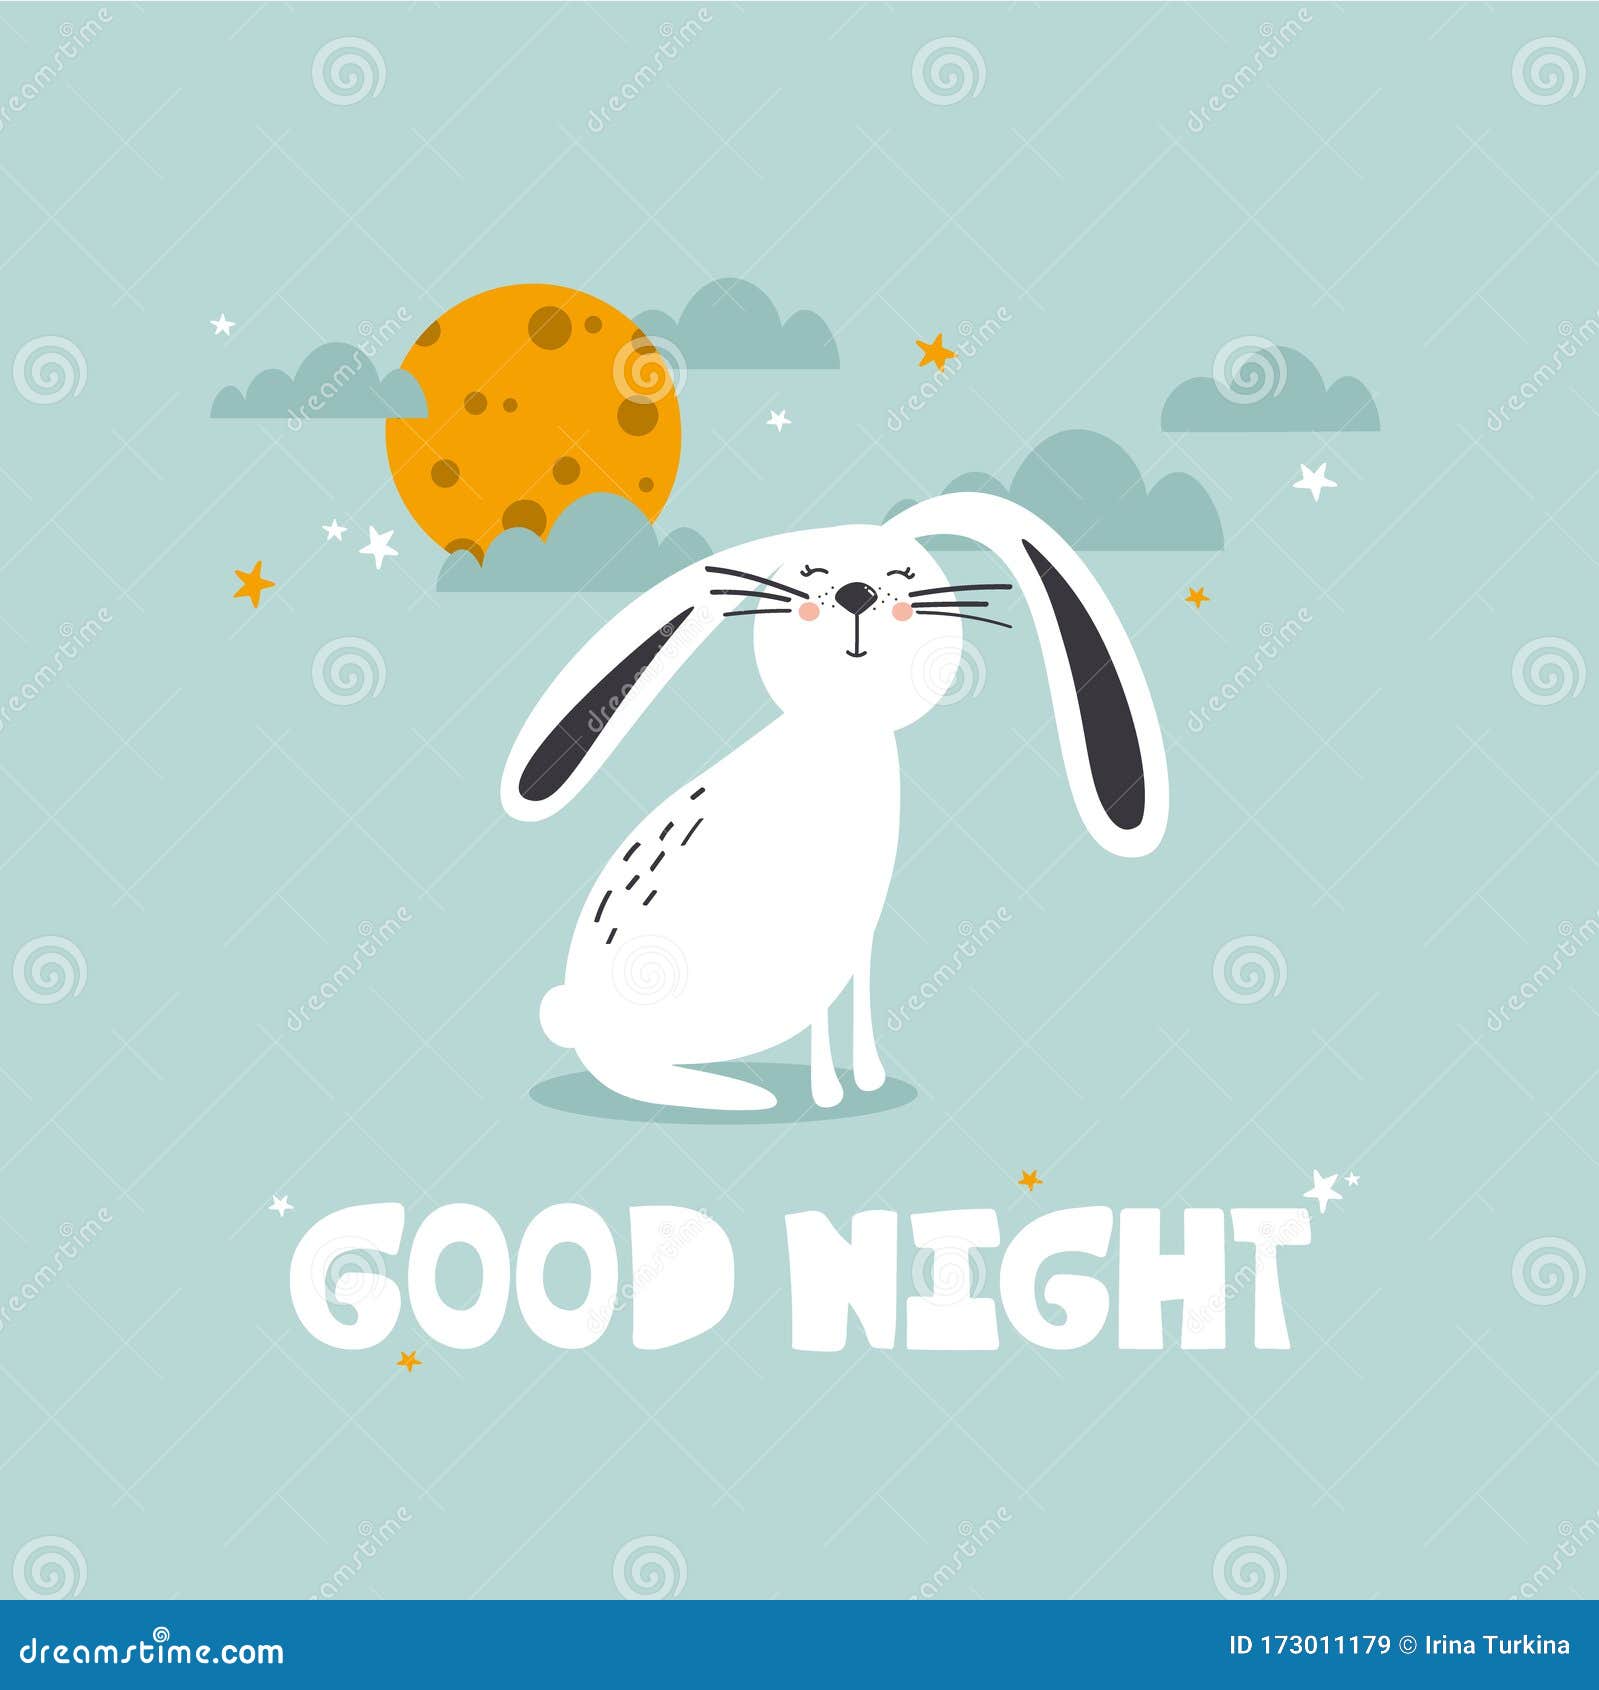 Colorful Background With Happy Rabbit, Moon, Stars, English Text. Good Night.  Decorative Cute Illustration With Animal, Night Sky Stock Vector -  Illustration Of Drawn, Cartoon: 173011179